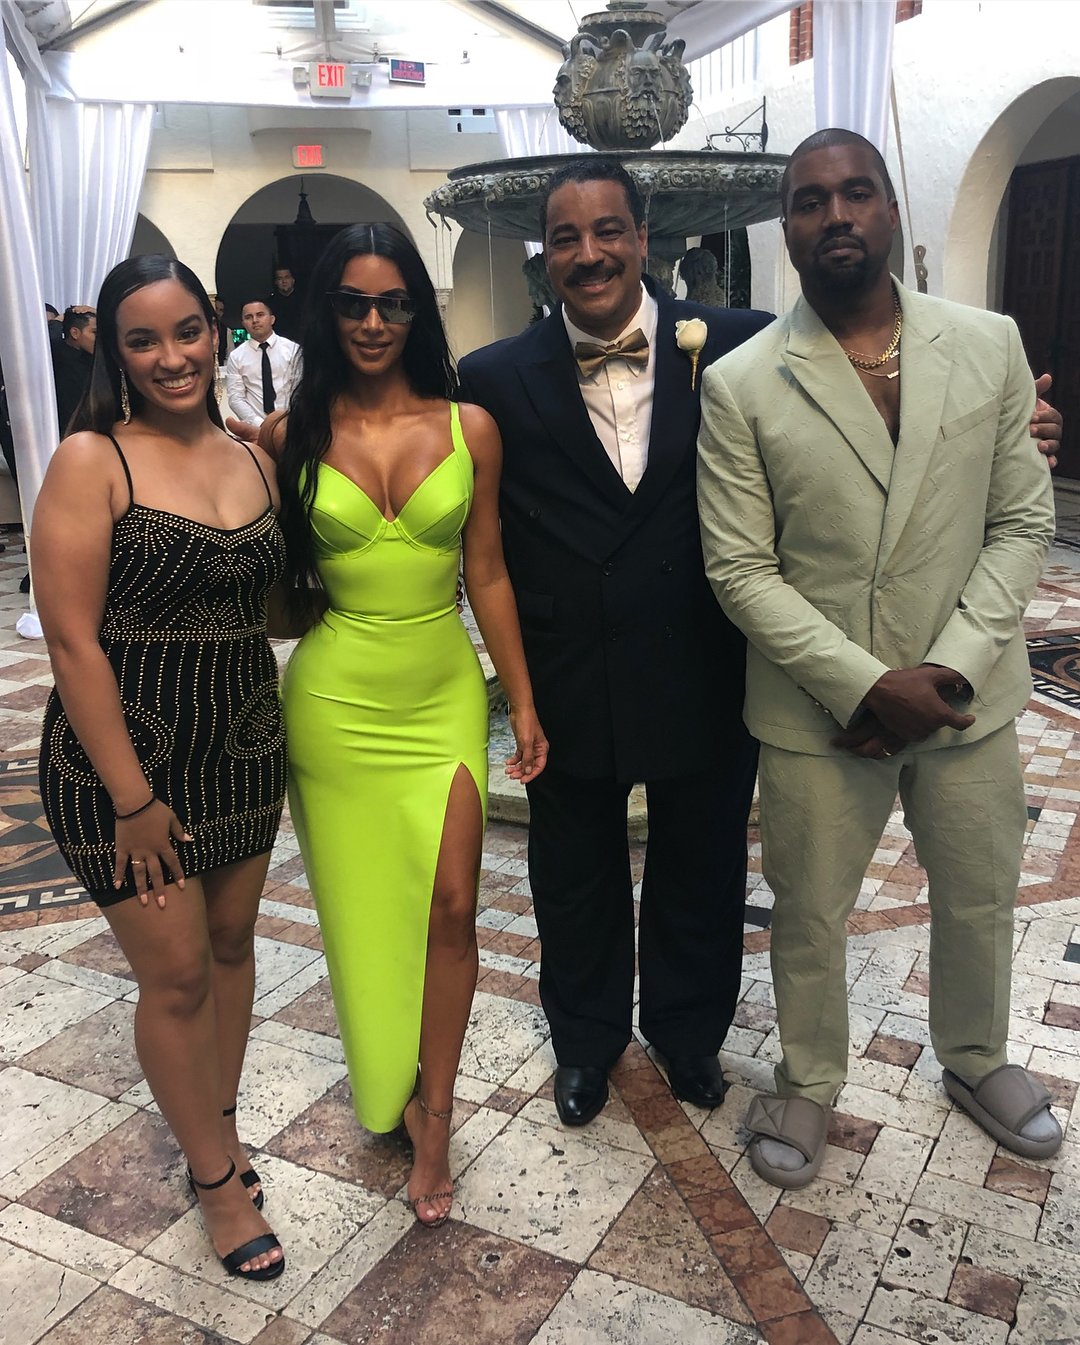 The Wests On Twitter: "Kim & Kanye At @2chainz's Wedd...